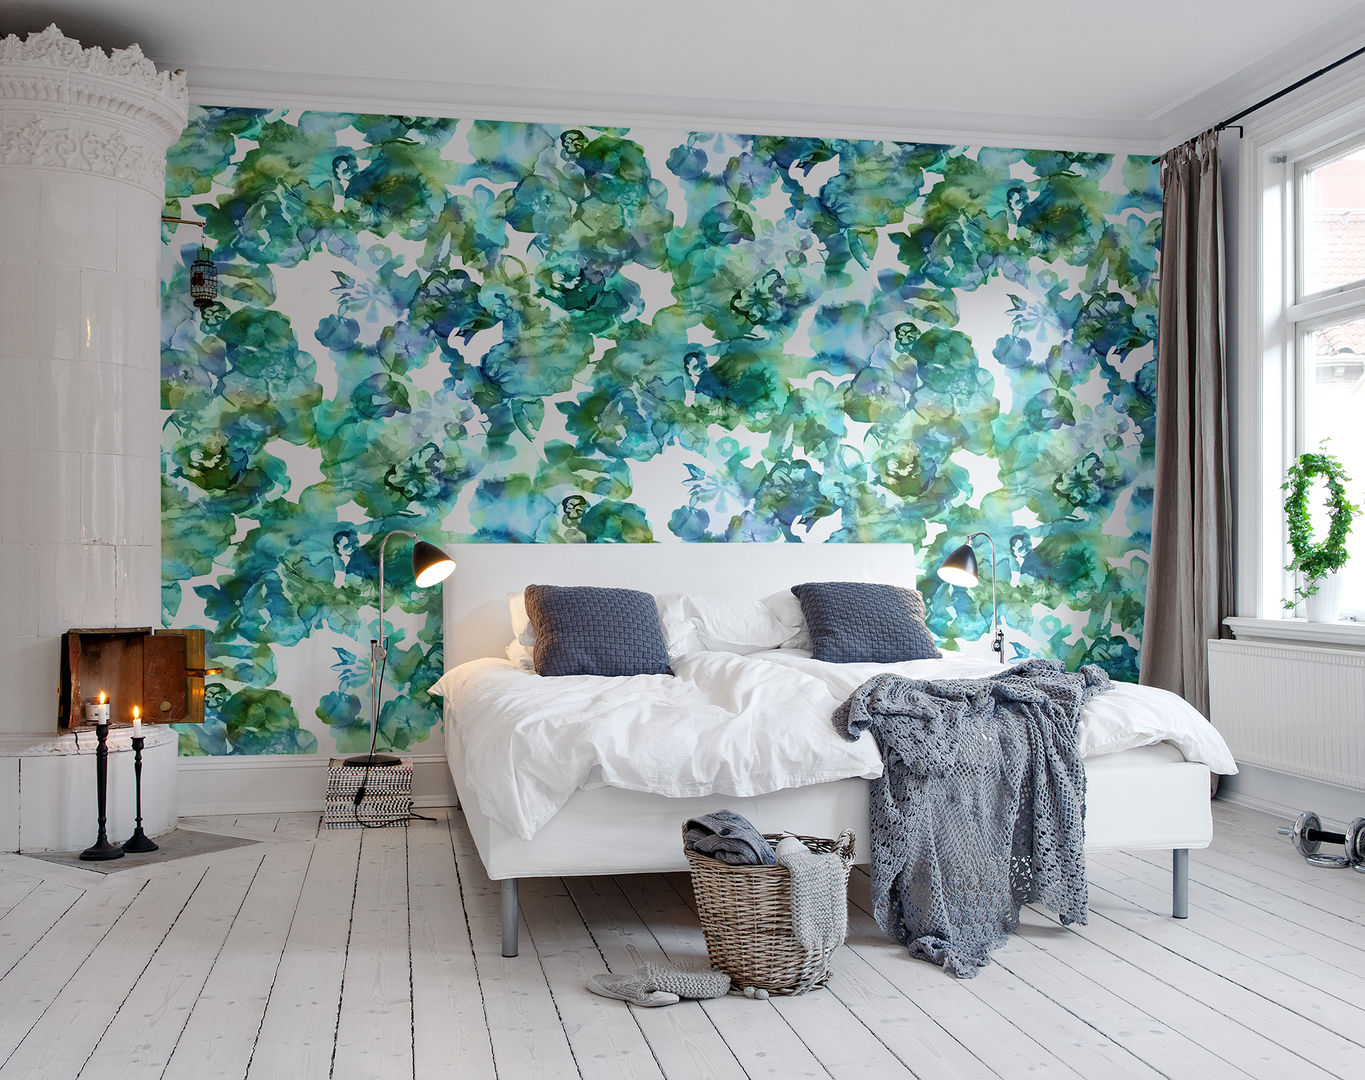 Lily Pond homify Walls